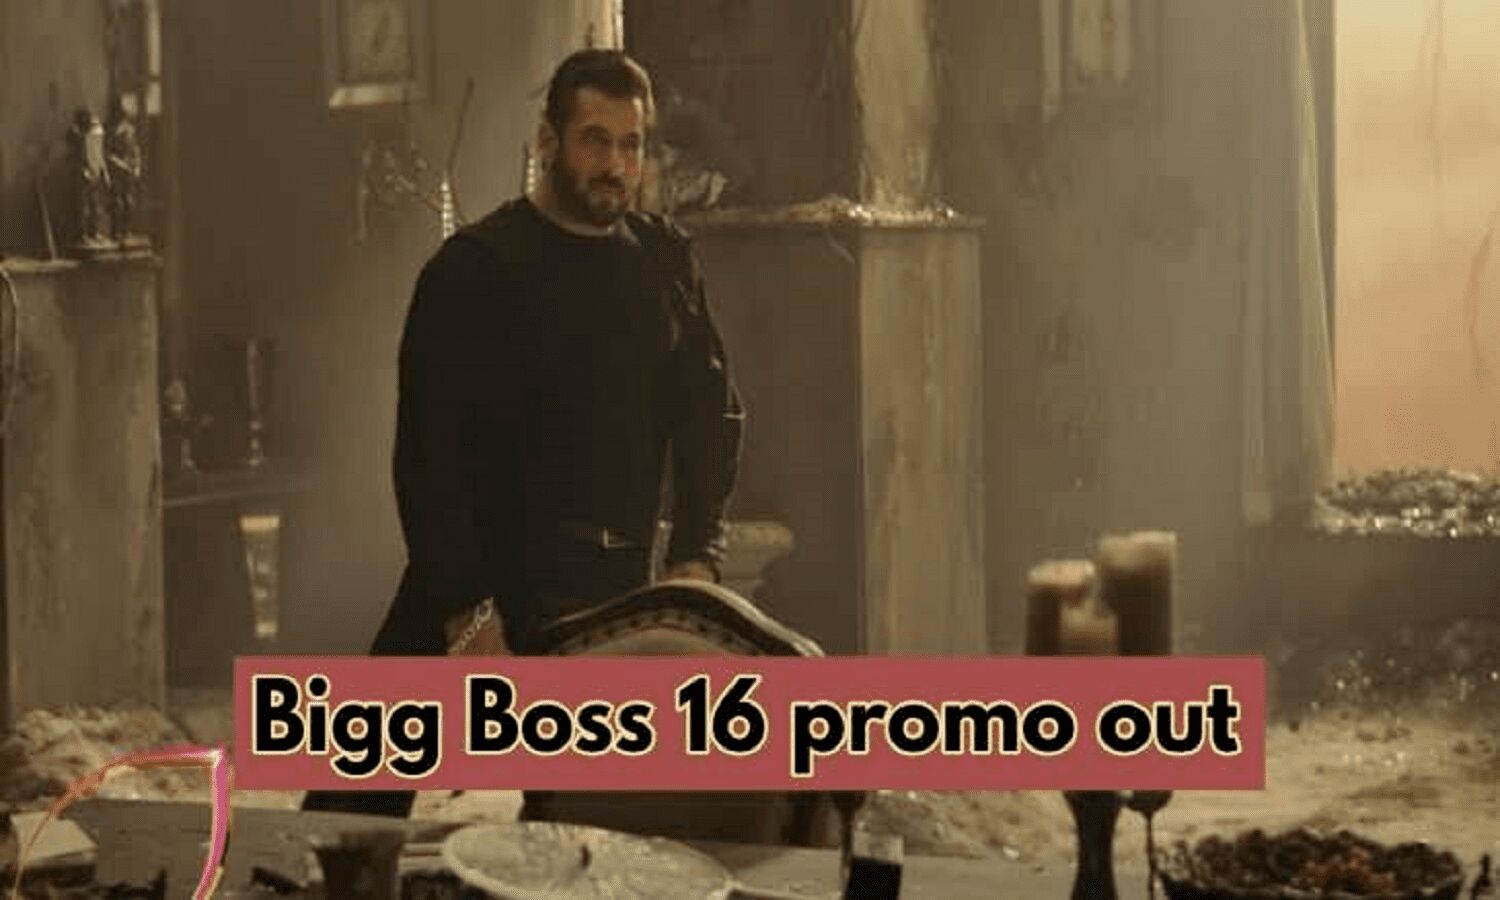 Fans’ senses fly after watching the promo of Big Boss 16, this time Big Boss will play himself